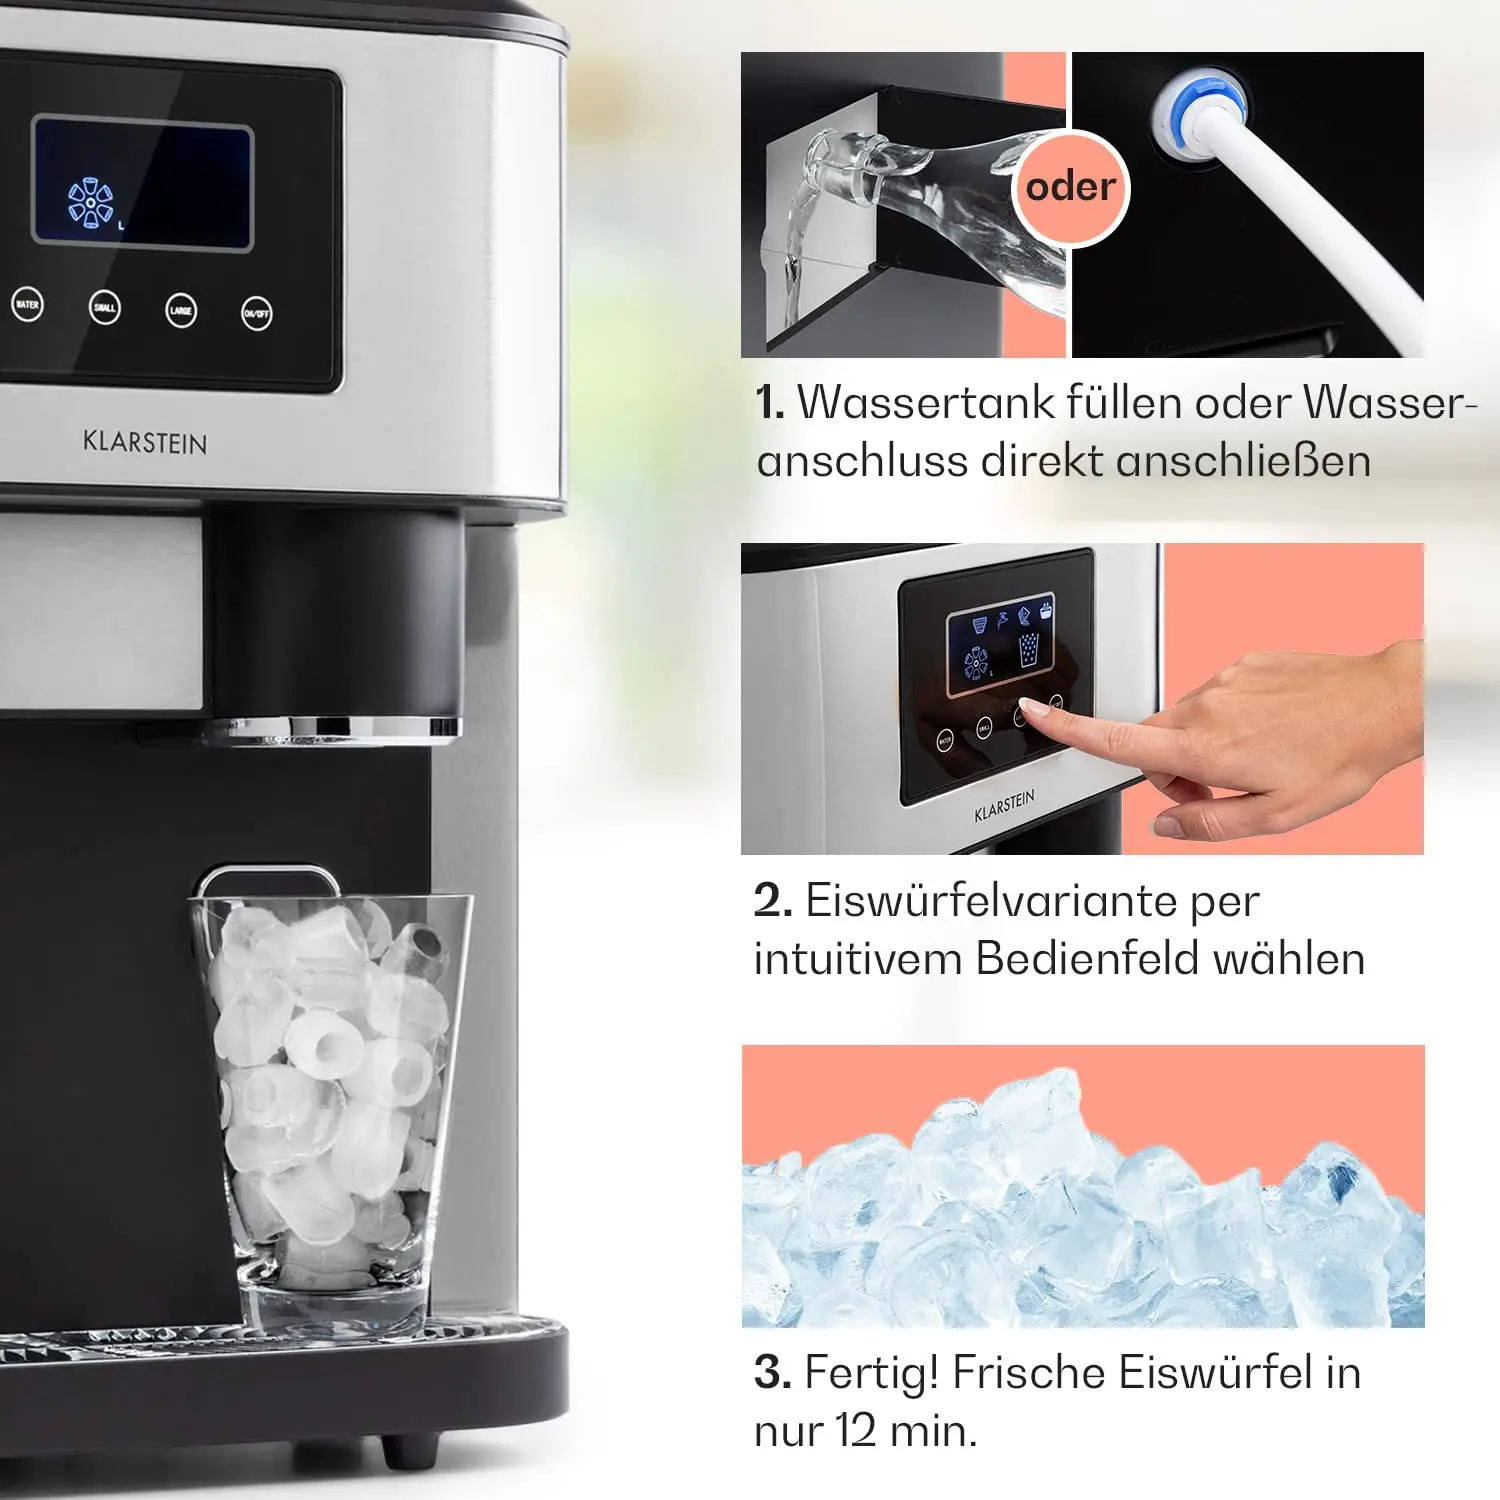 Automatic 15kg Household Portable Ice Maker & crusher 2 Size Ice Cubes Self-Cleaning Ice Making Machine Home Use Party ETL CB CE